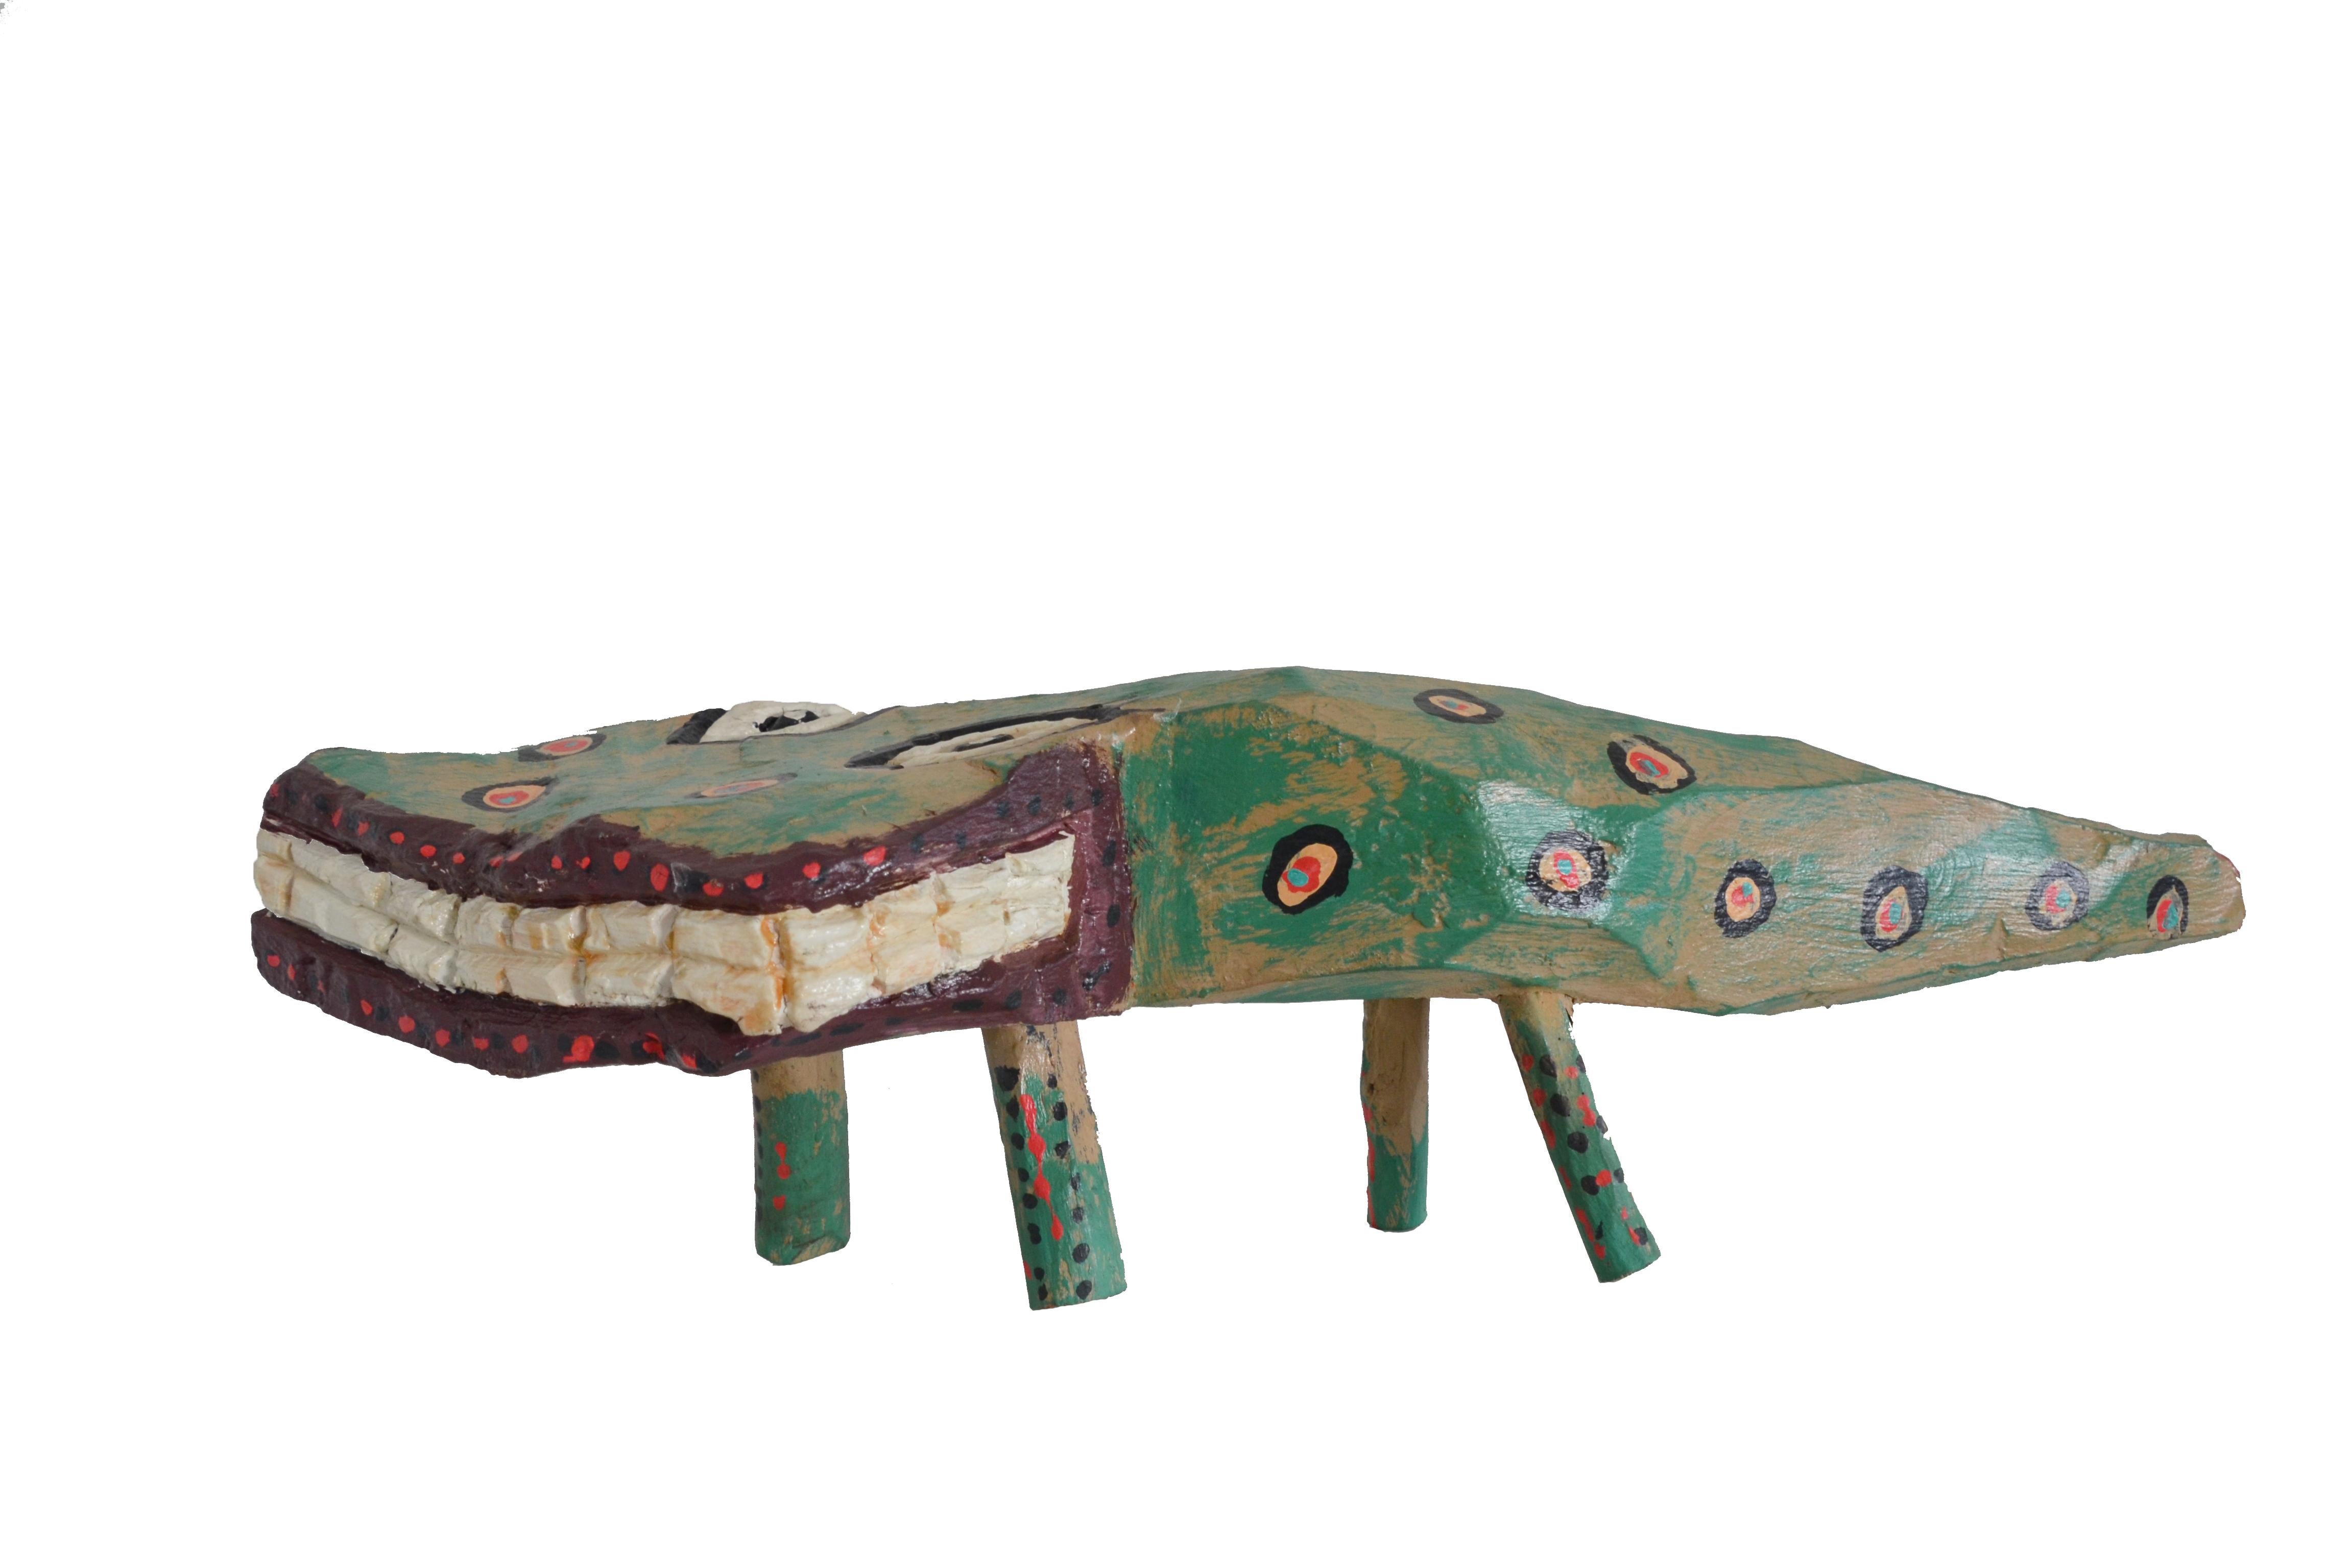 This is a hand-carved and hand-painted wooden sculpture, representing a reptile found in Brazil. The artist, Iris, from the Association Mestre Noza, becomes from Juazeiro do Norte, Ceará, Brazil, where the piece was also made. This is a great